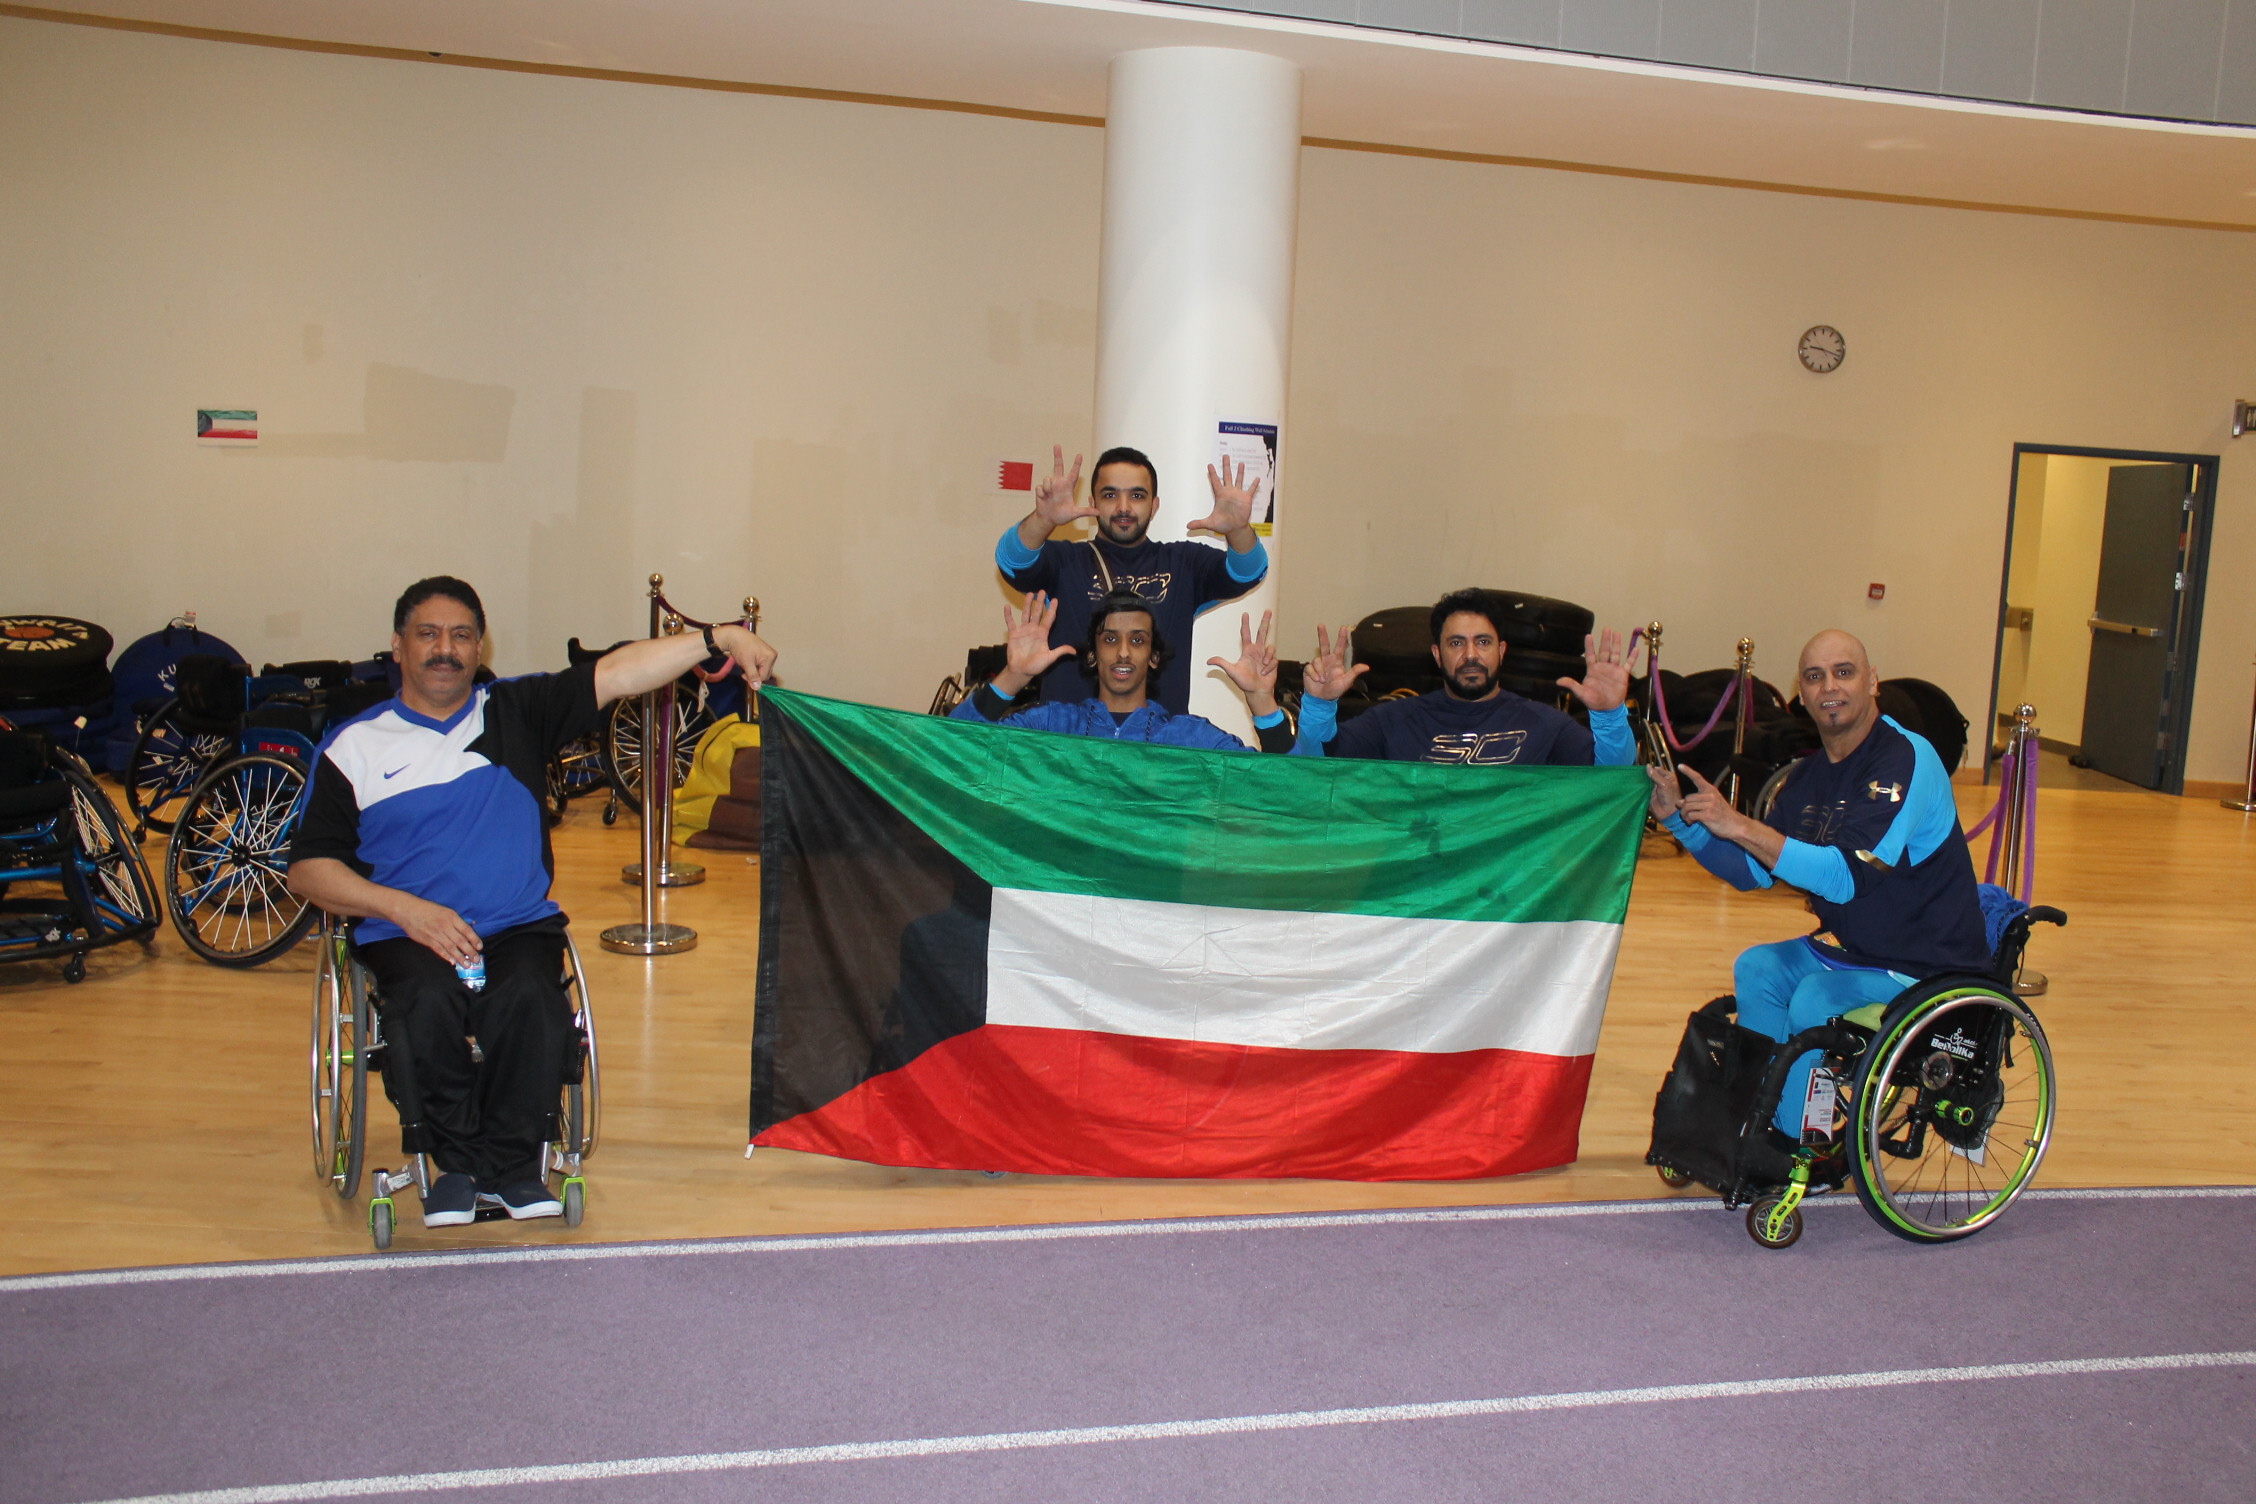 The Kuwaiti team win the 8th GCC Wheelchair Basketball Championship in a row after beating Saudi Arabia 62-56 in the final